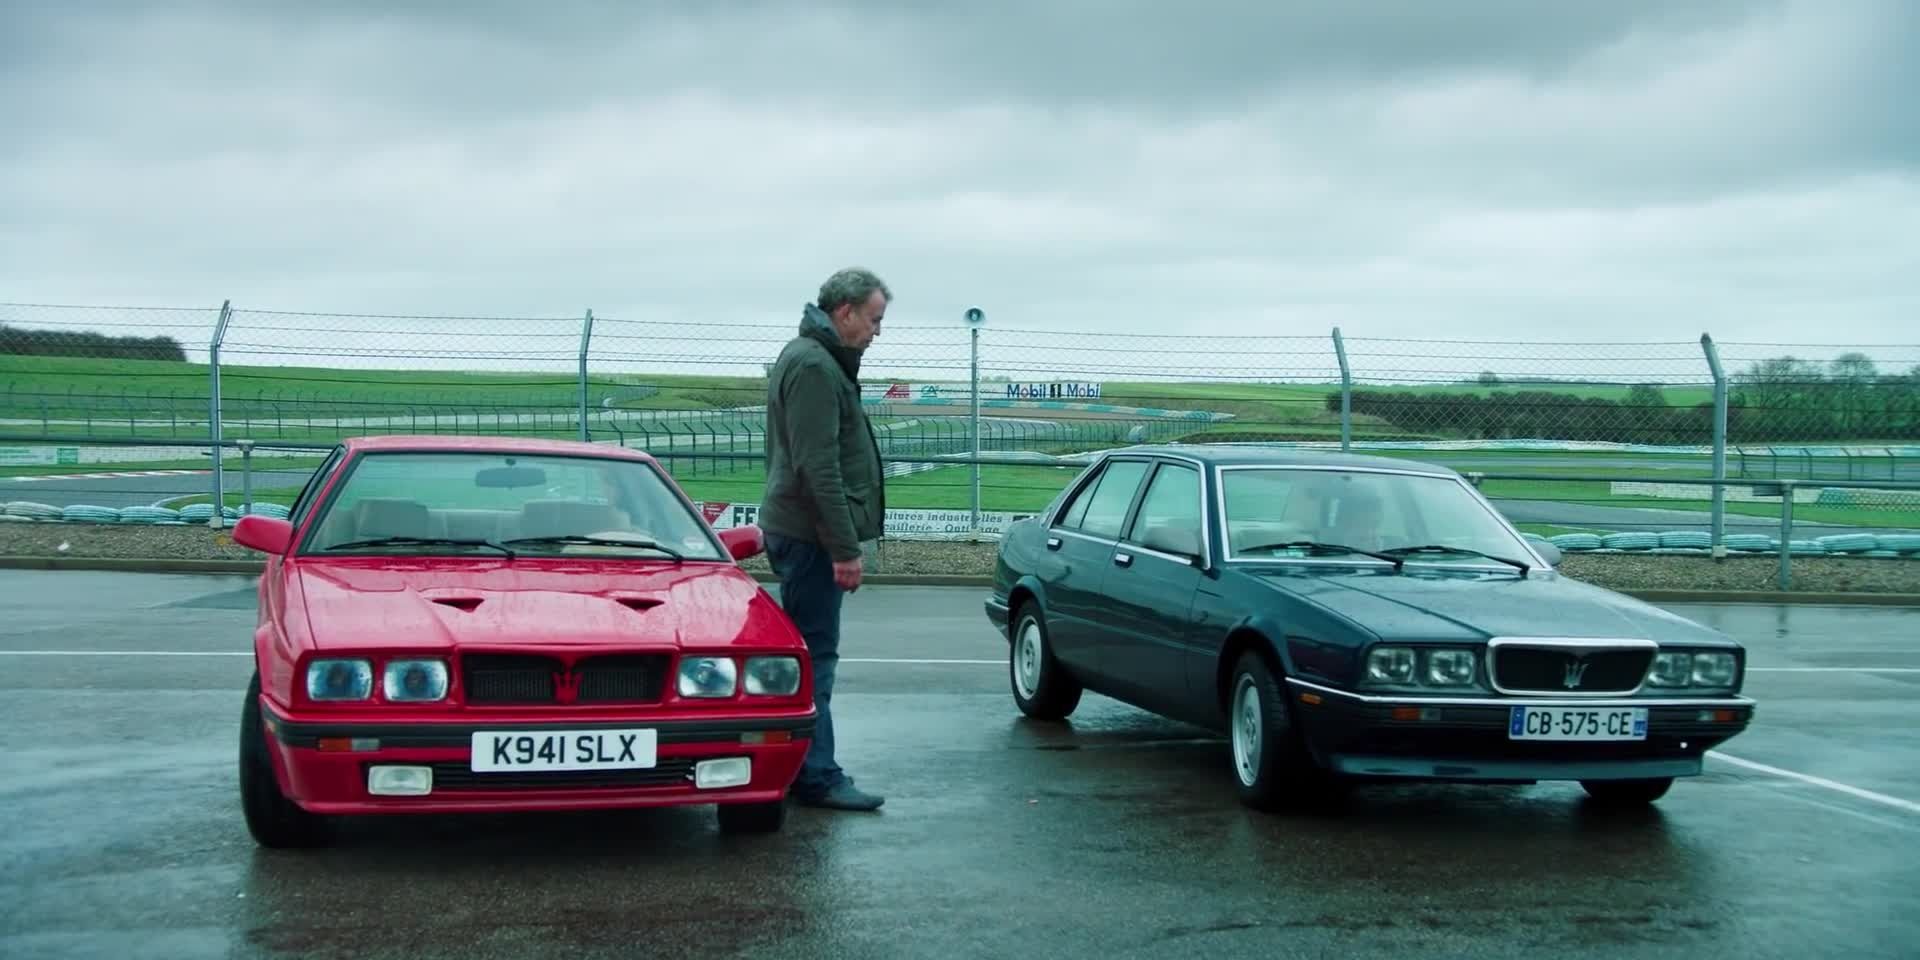 Clarkson standing beside a Maserati Bi-turbo S and looking at a 430 saloon driven by Hammond